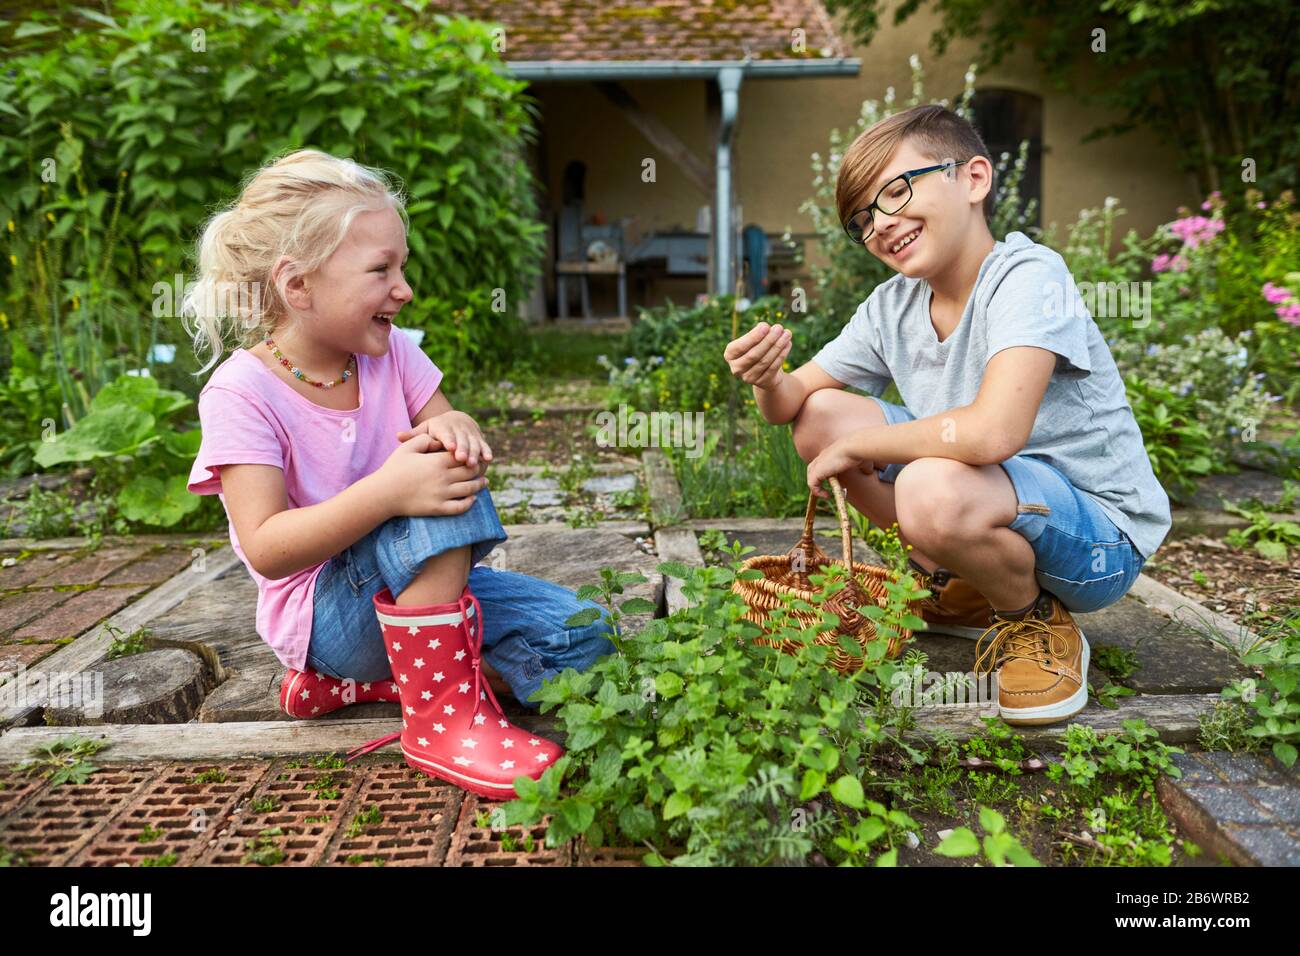 Children investigating food. Series: Preparation of a herbal drink. Picking herbs. Learning according to the Reggio Pedagogy principle, playful understanding and discovery. Germany. Stock Photo